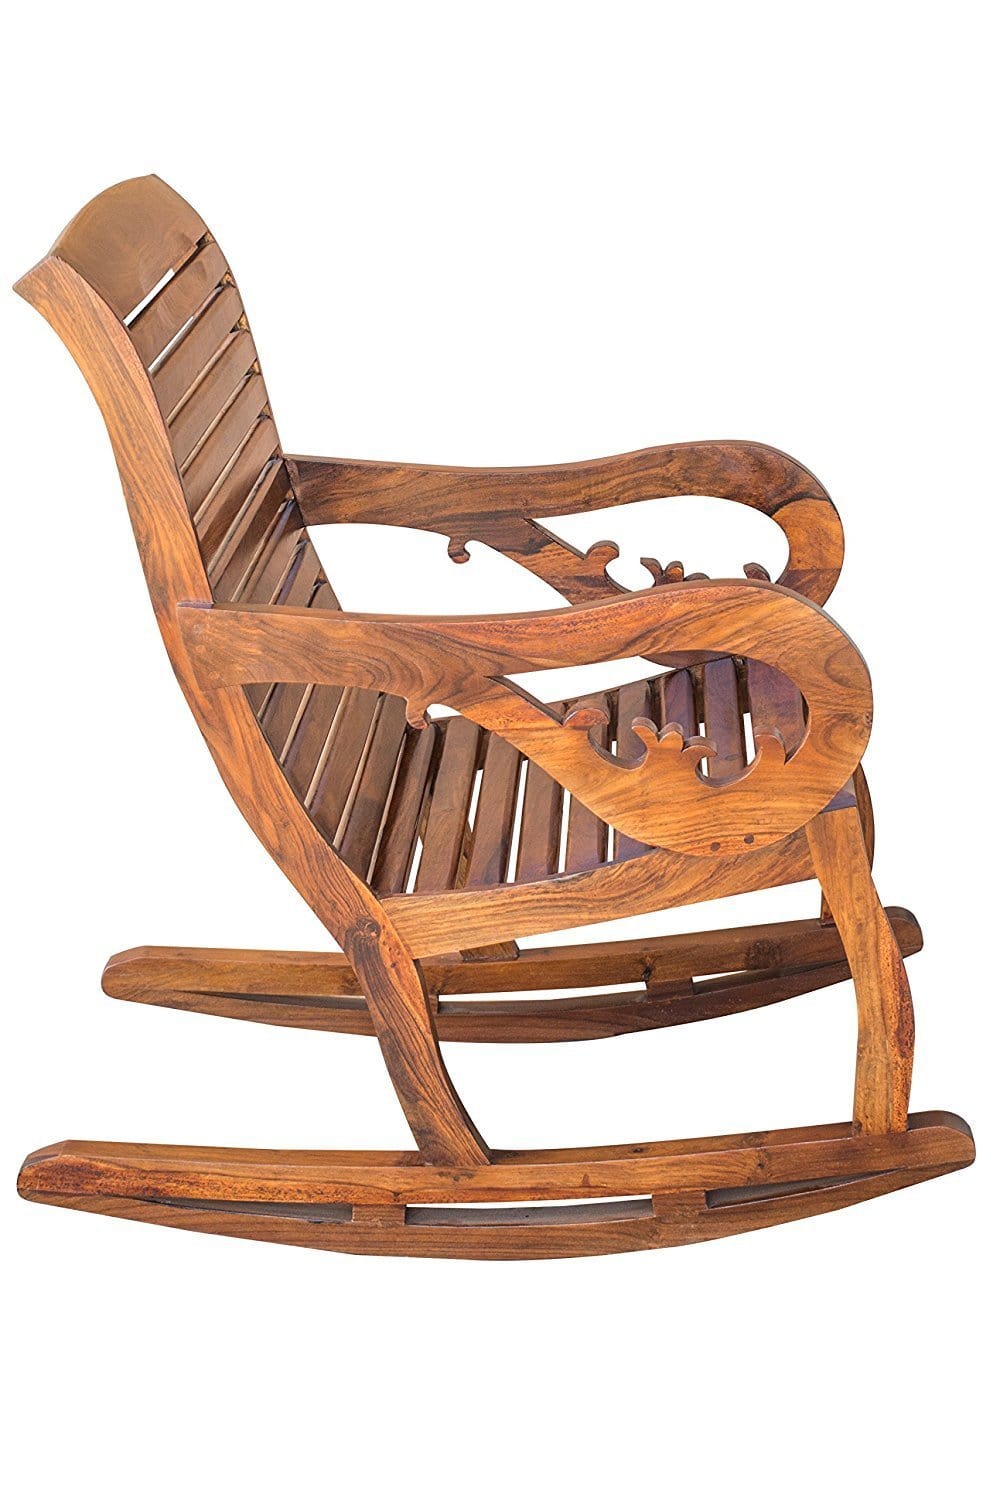 Wooden Royal Rocking Chair Wood Rocking Chair in Mahogany SPL Finish for Living Room Lounge Garden